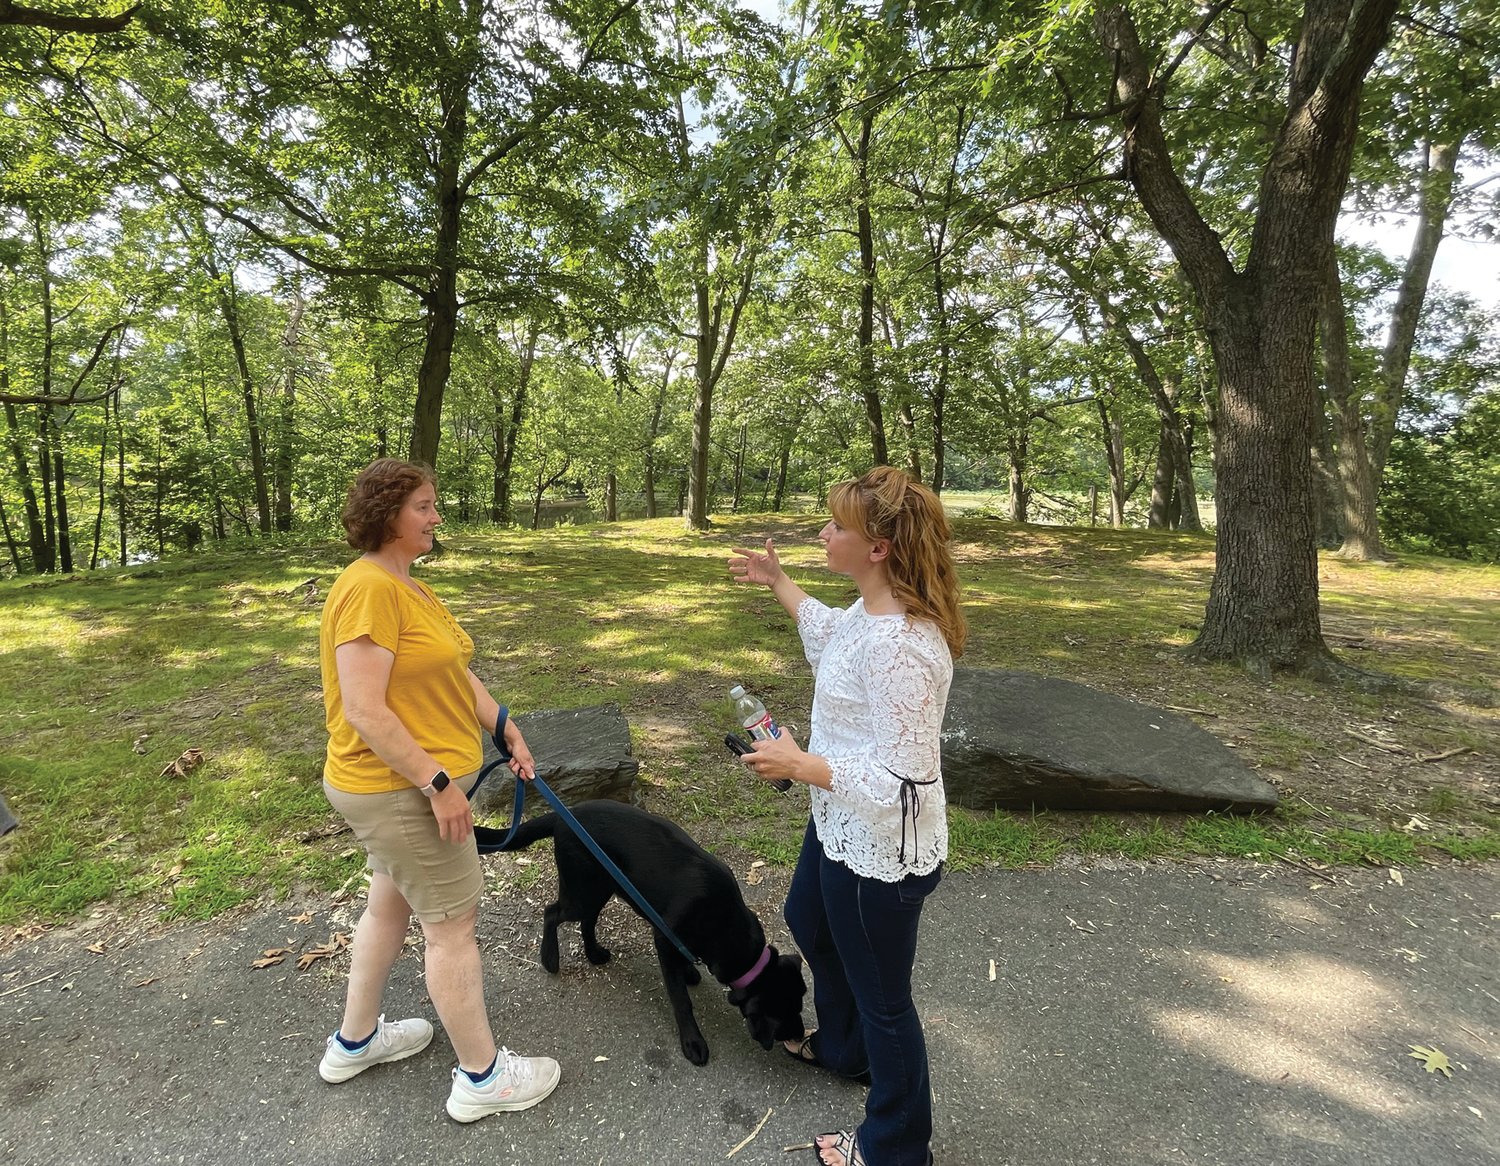 MEETING IN THE PARK: State Rep. Barbara Ann Fenton-Fung chats with Gail Bennett, a resident of the Meshanticut Park area, during a summer walk around the loop.